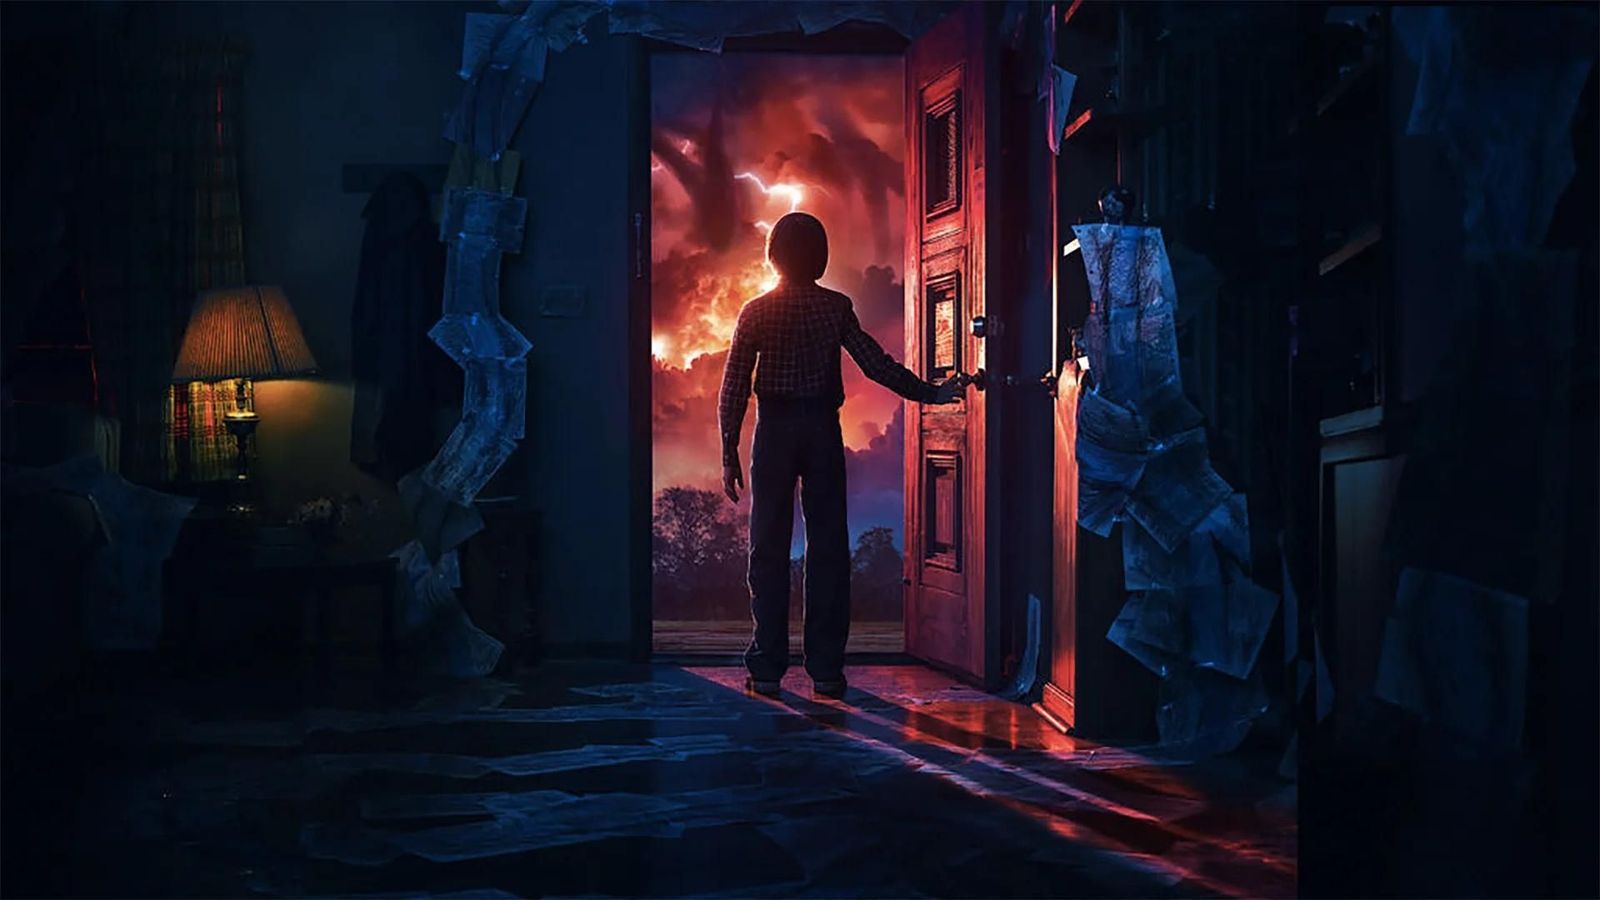 Key art for the Dead by Daylight and Stranger Things collaboration featuring Will Byers